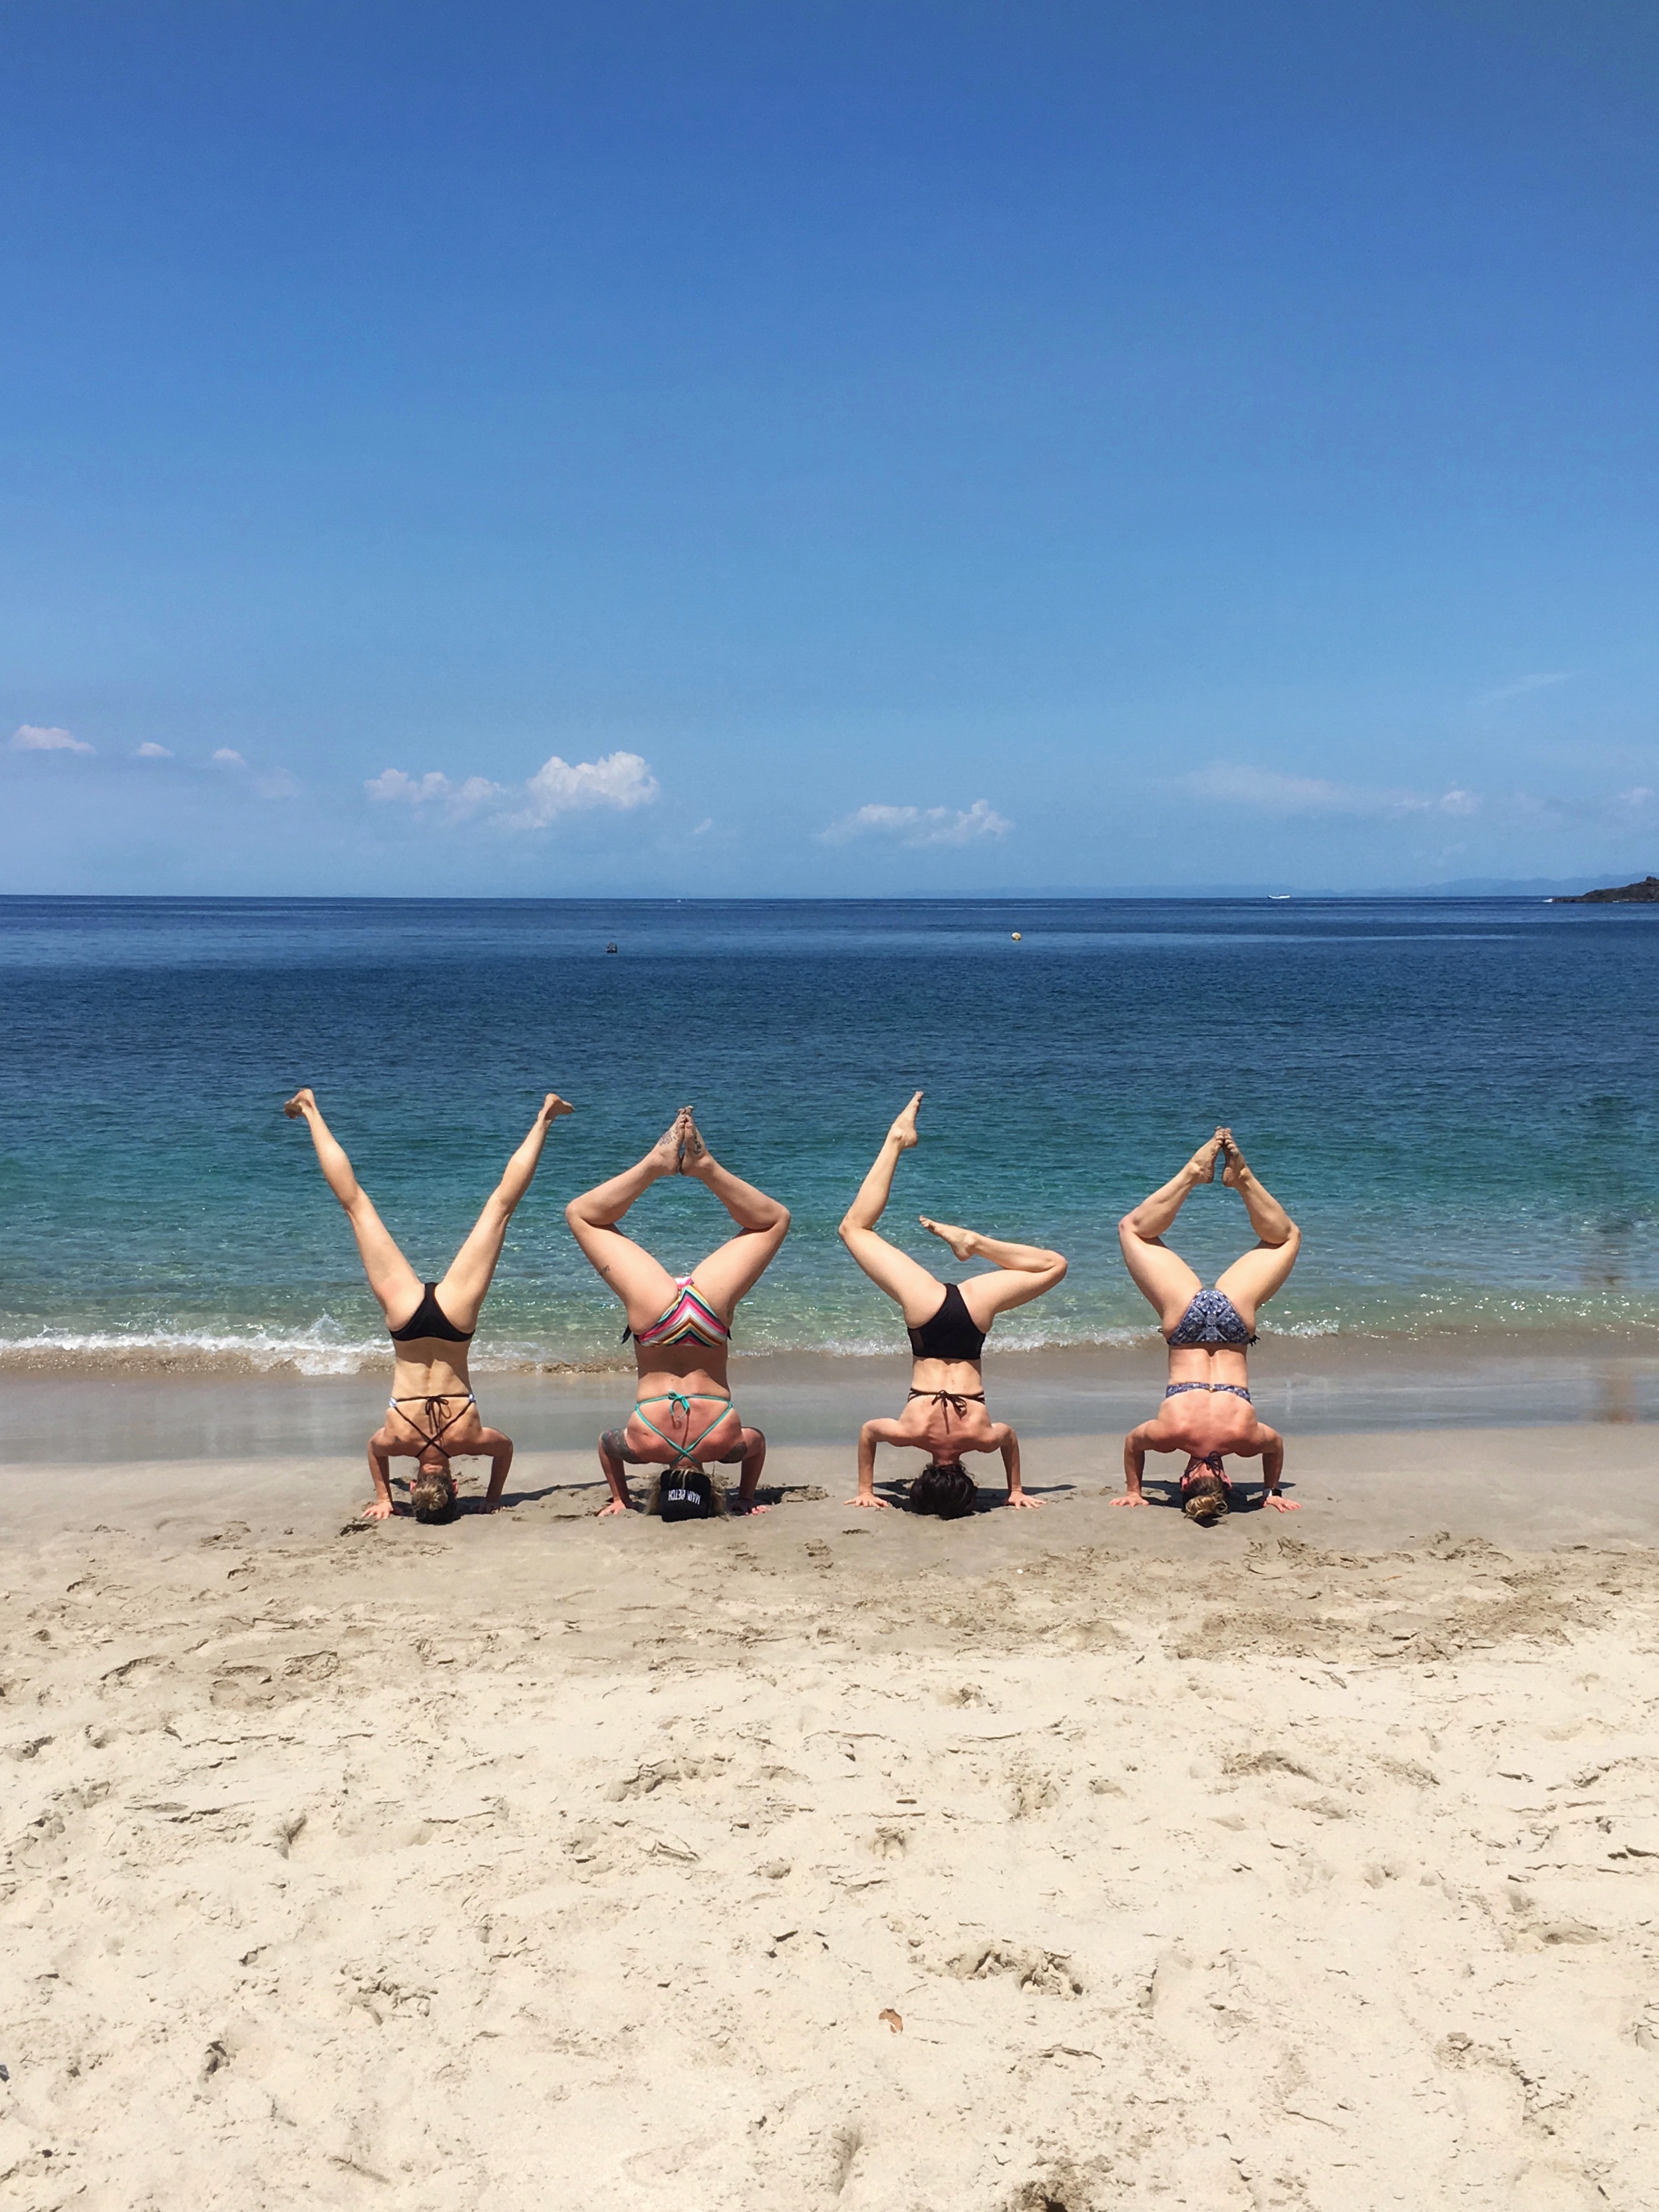 Y.O.G.A on the beaches of Bali | EAT.PRAY.MOVE Yoga | Bali, Indonesia